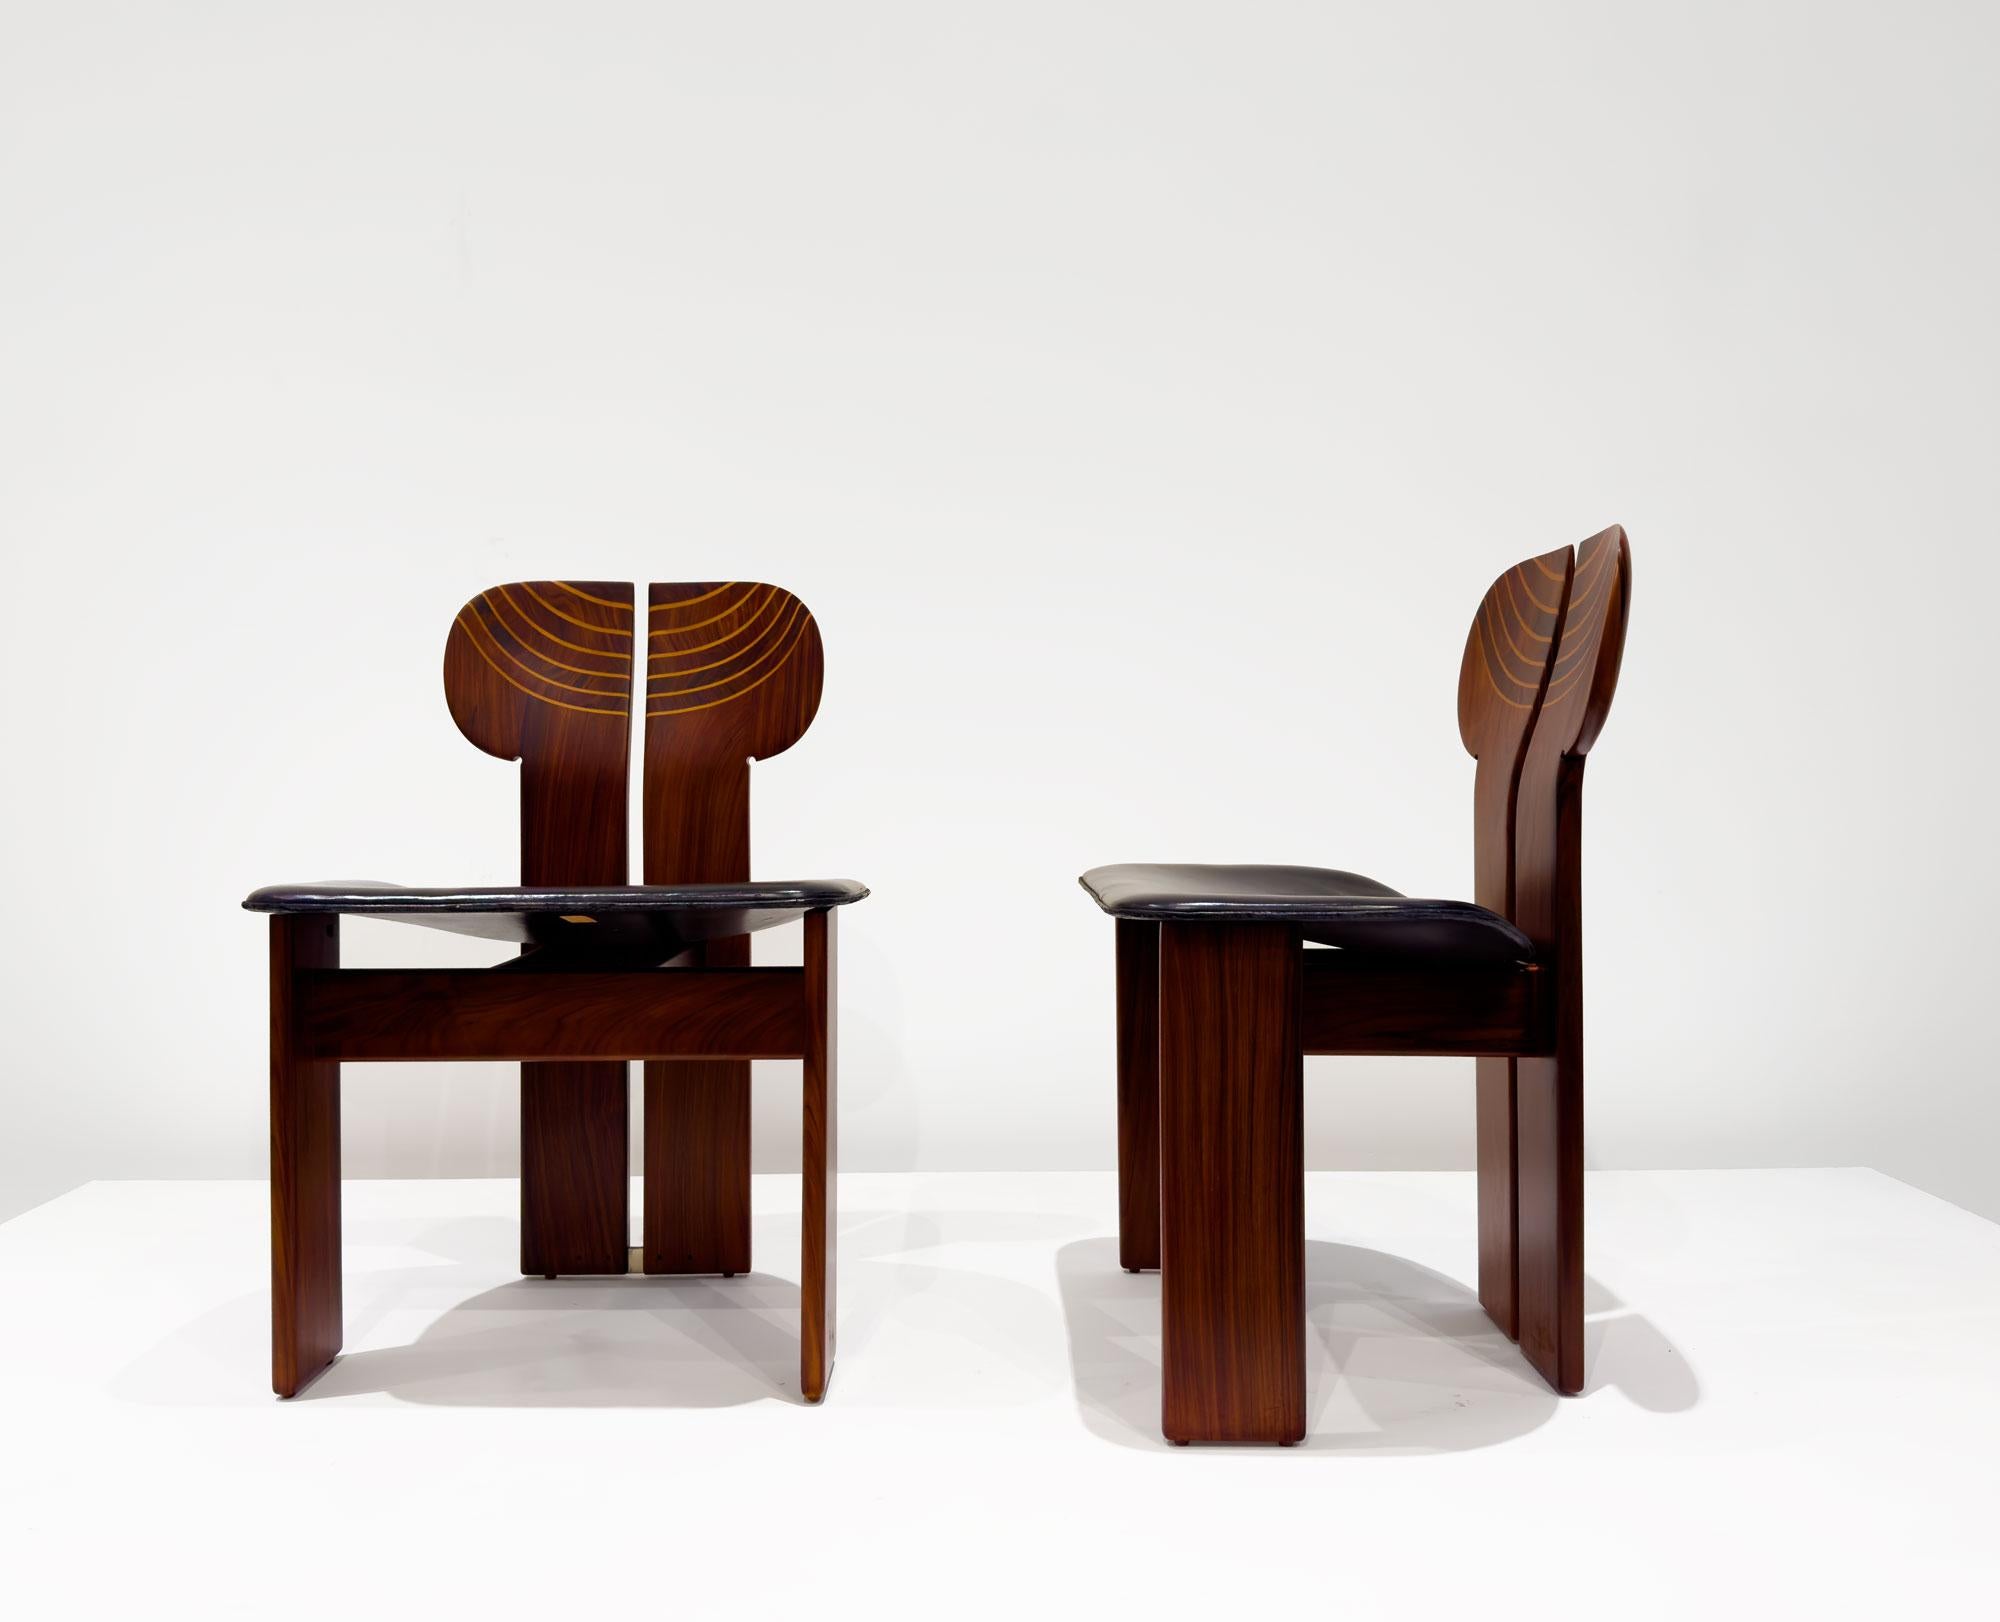 Afra & Tobia Scarpa
Africa Chairs
1970
Brass, Rosewood, Leather, Steel
30.71 H x 18.12 W x 22 d inches (Set of 2)